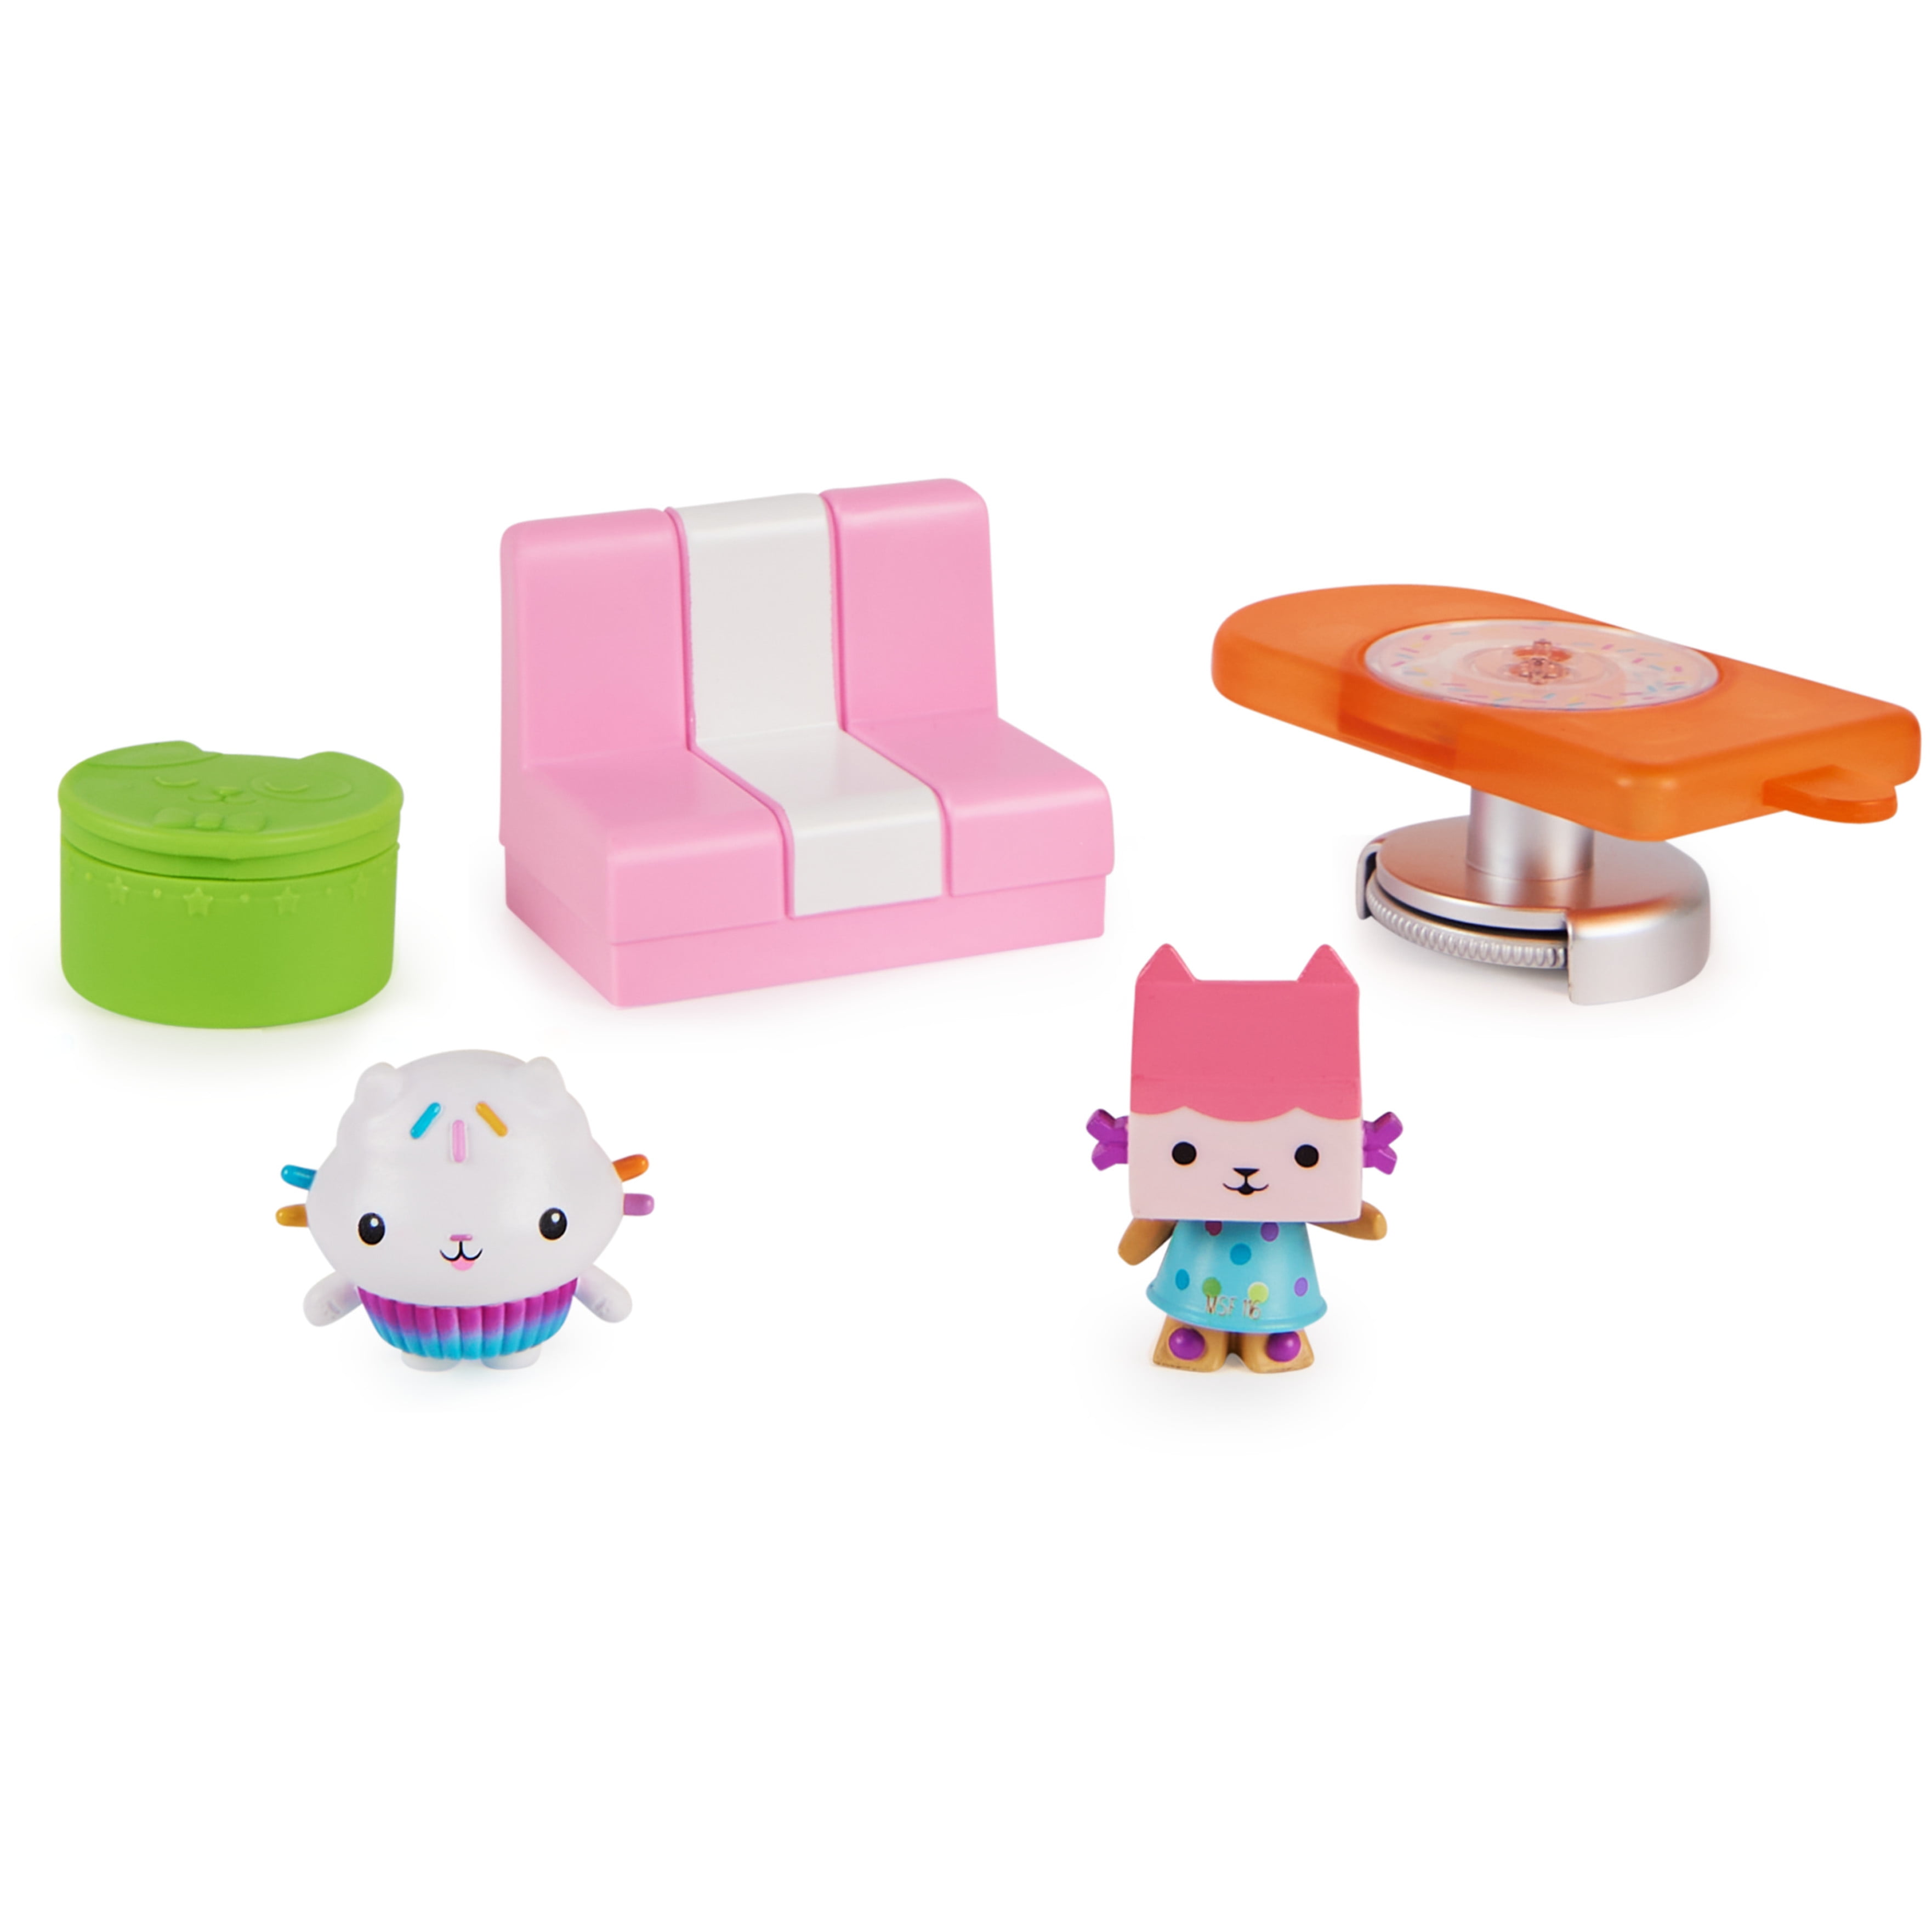 Gabbys Dollhouse (Walmart Exclusive) Kitchen Furniture and Figures for Kids 3 and Up